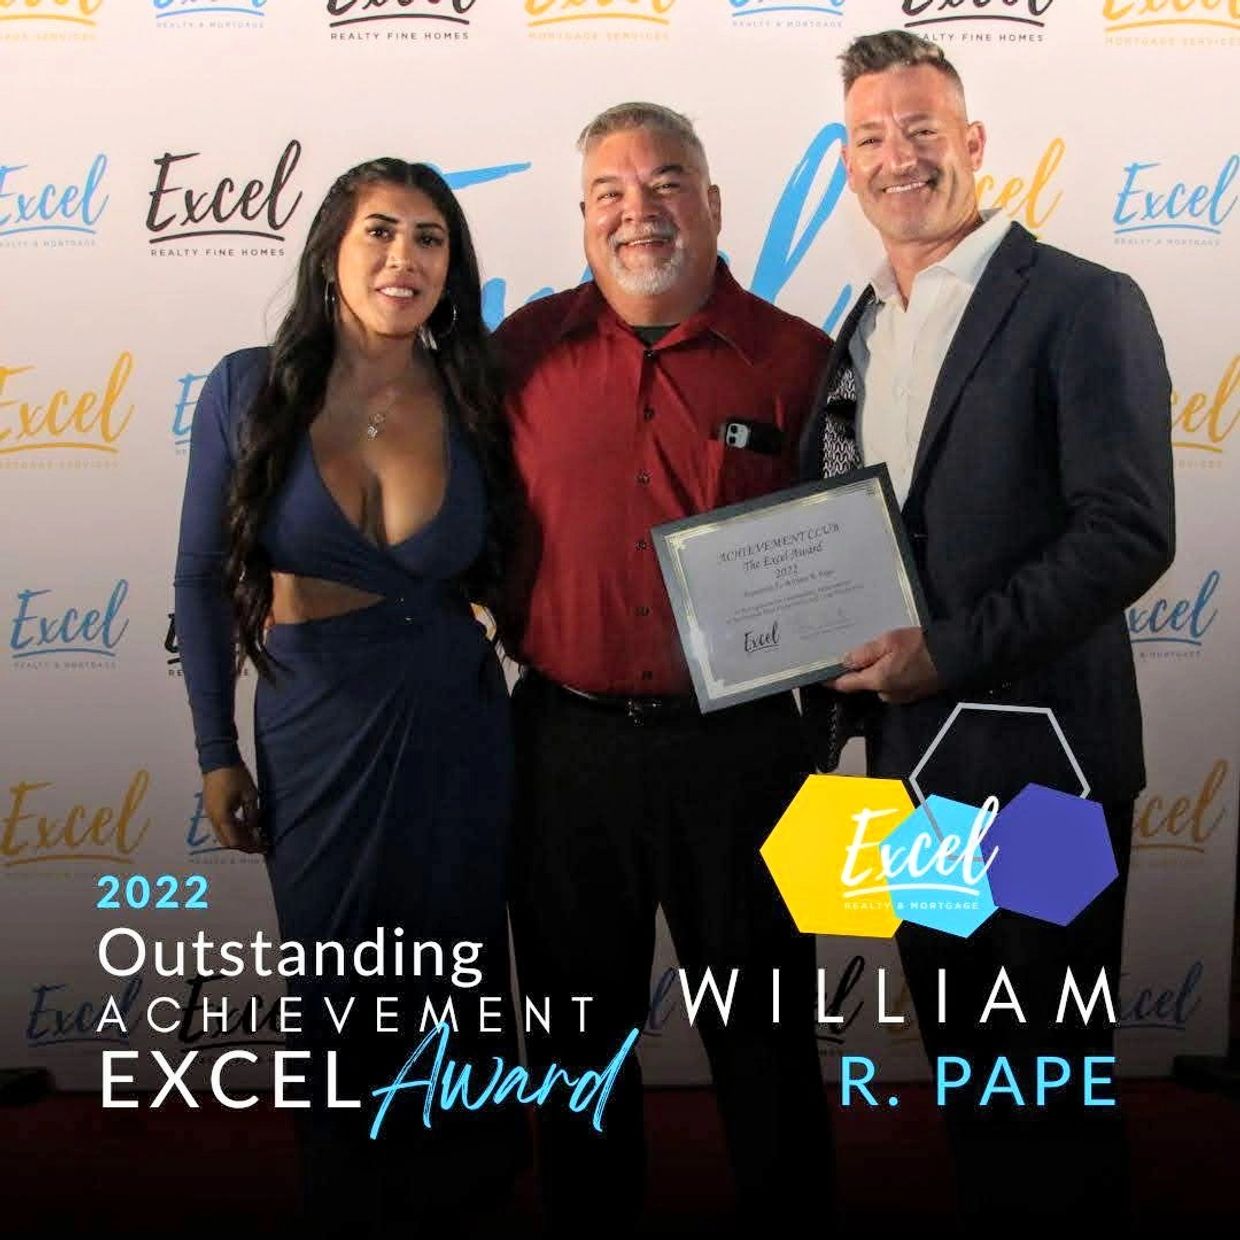 William R. Pape accepting an Outstanding Achievement Award for 2022 from Excel Realty office Broker 